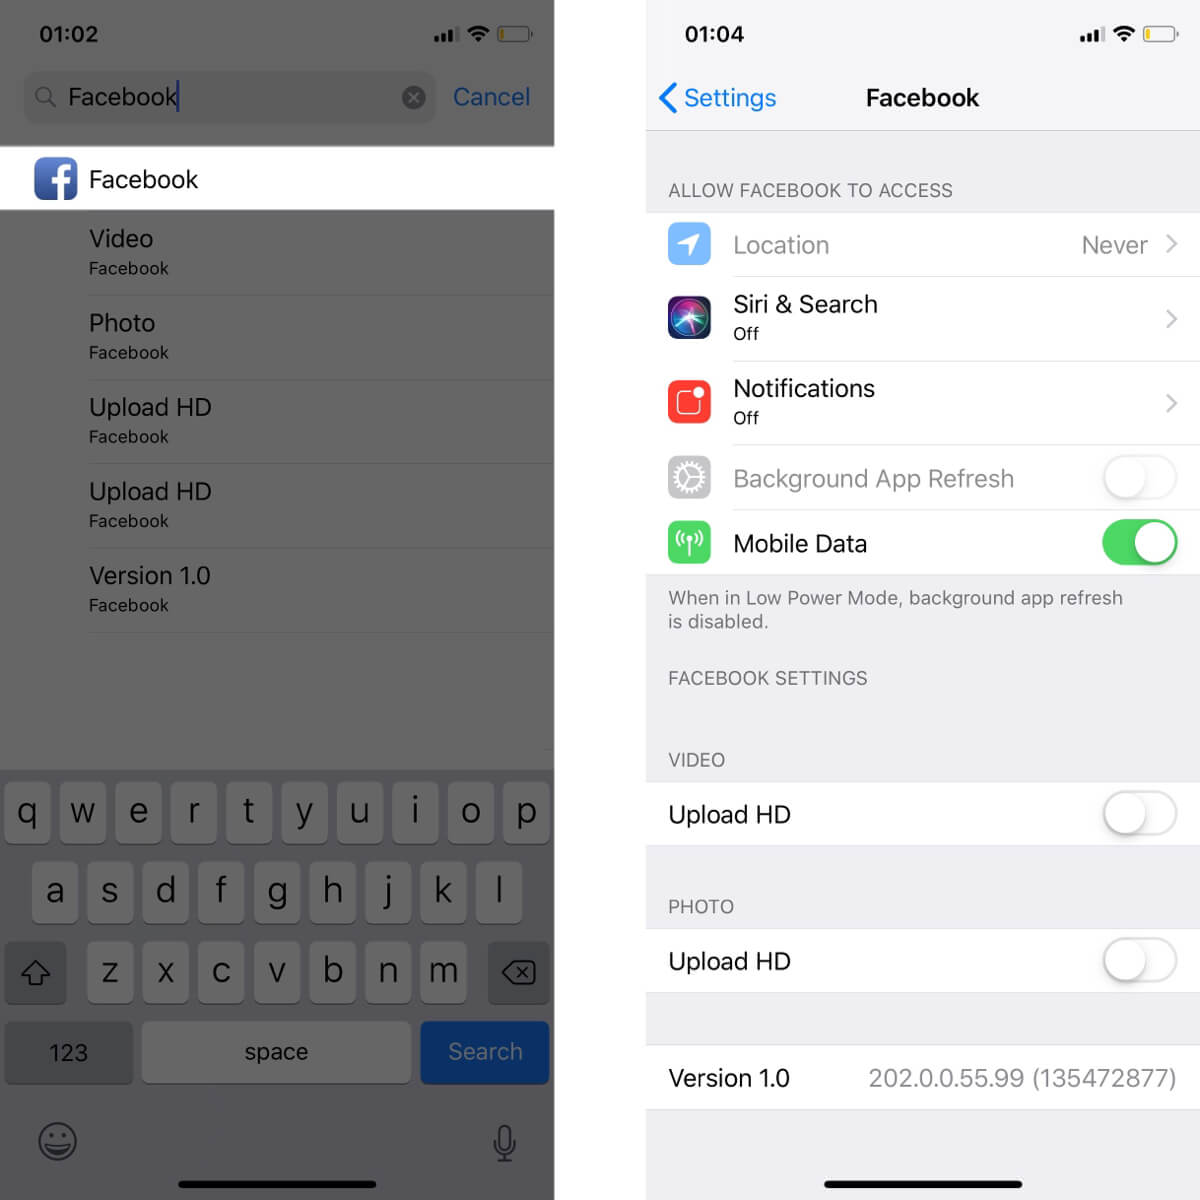 Screenshots showing how to change and restrict the permissions Facebook has on an iOS device.